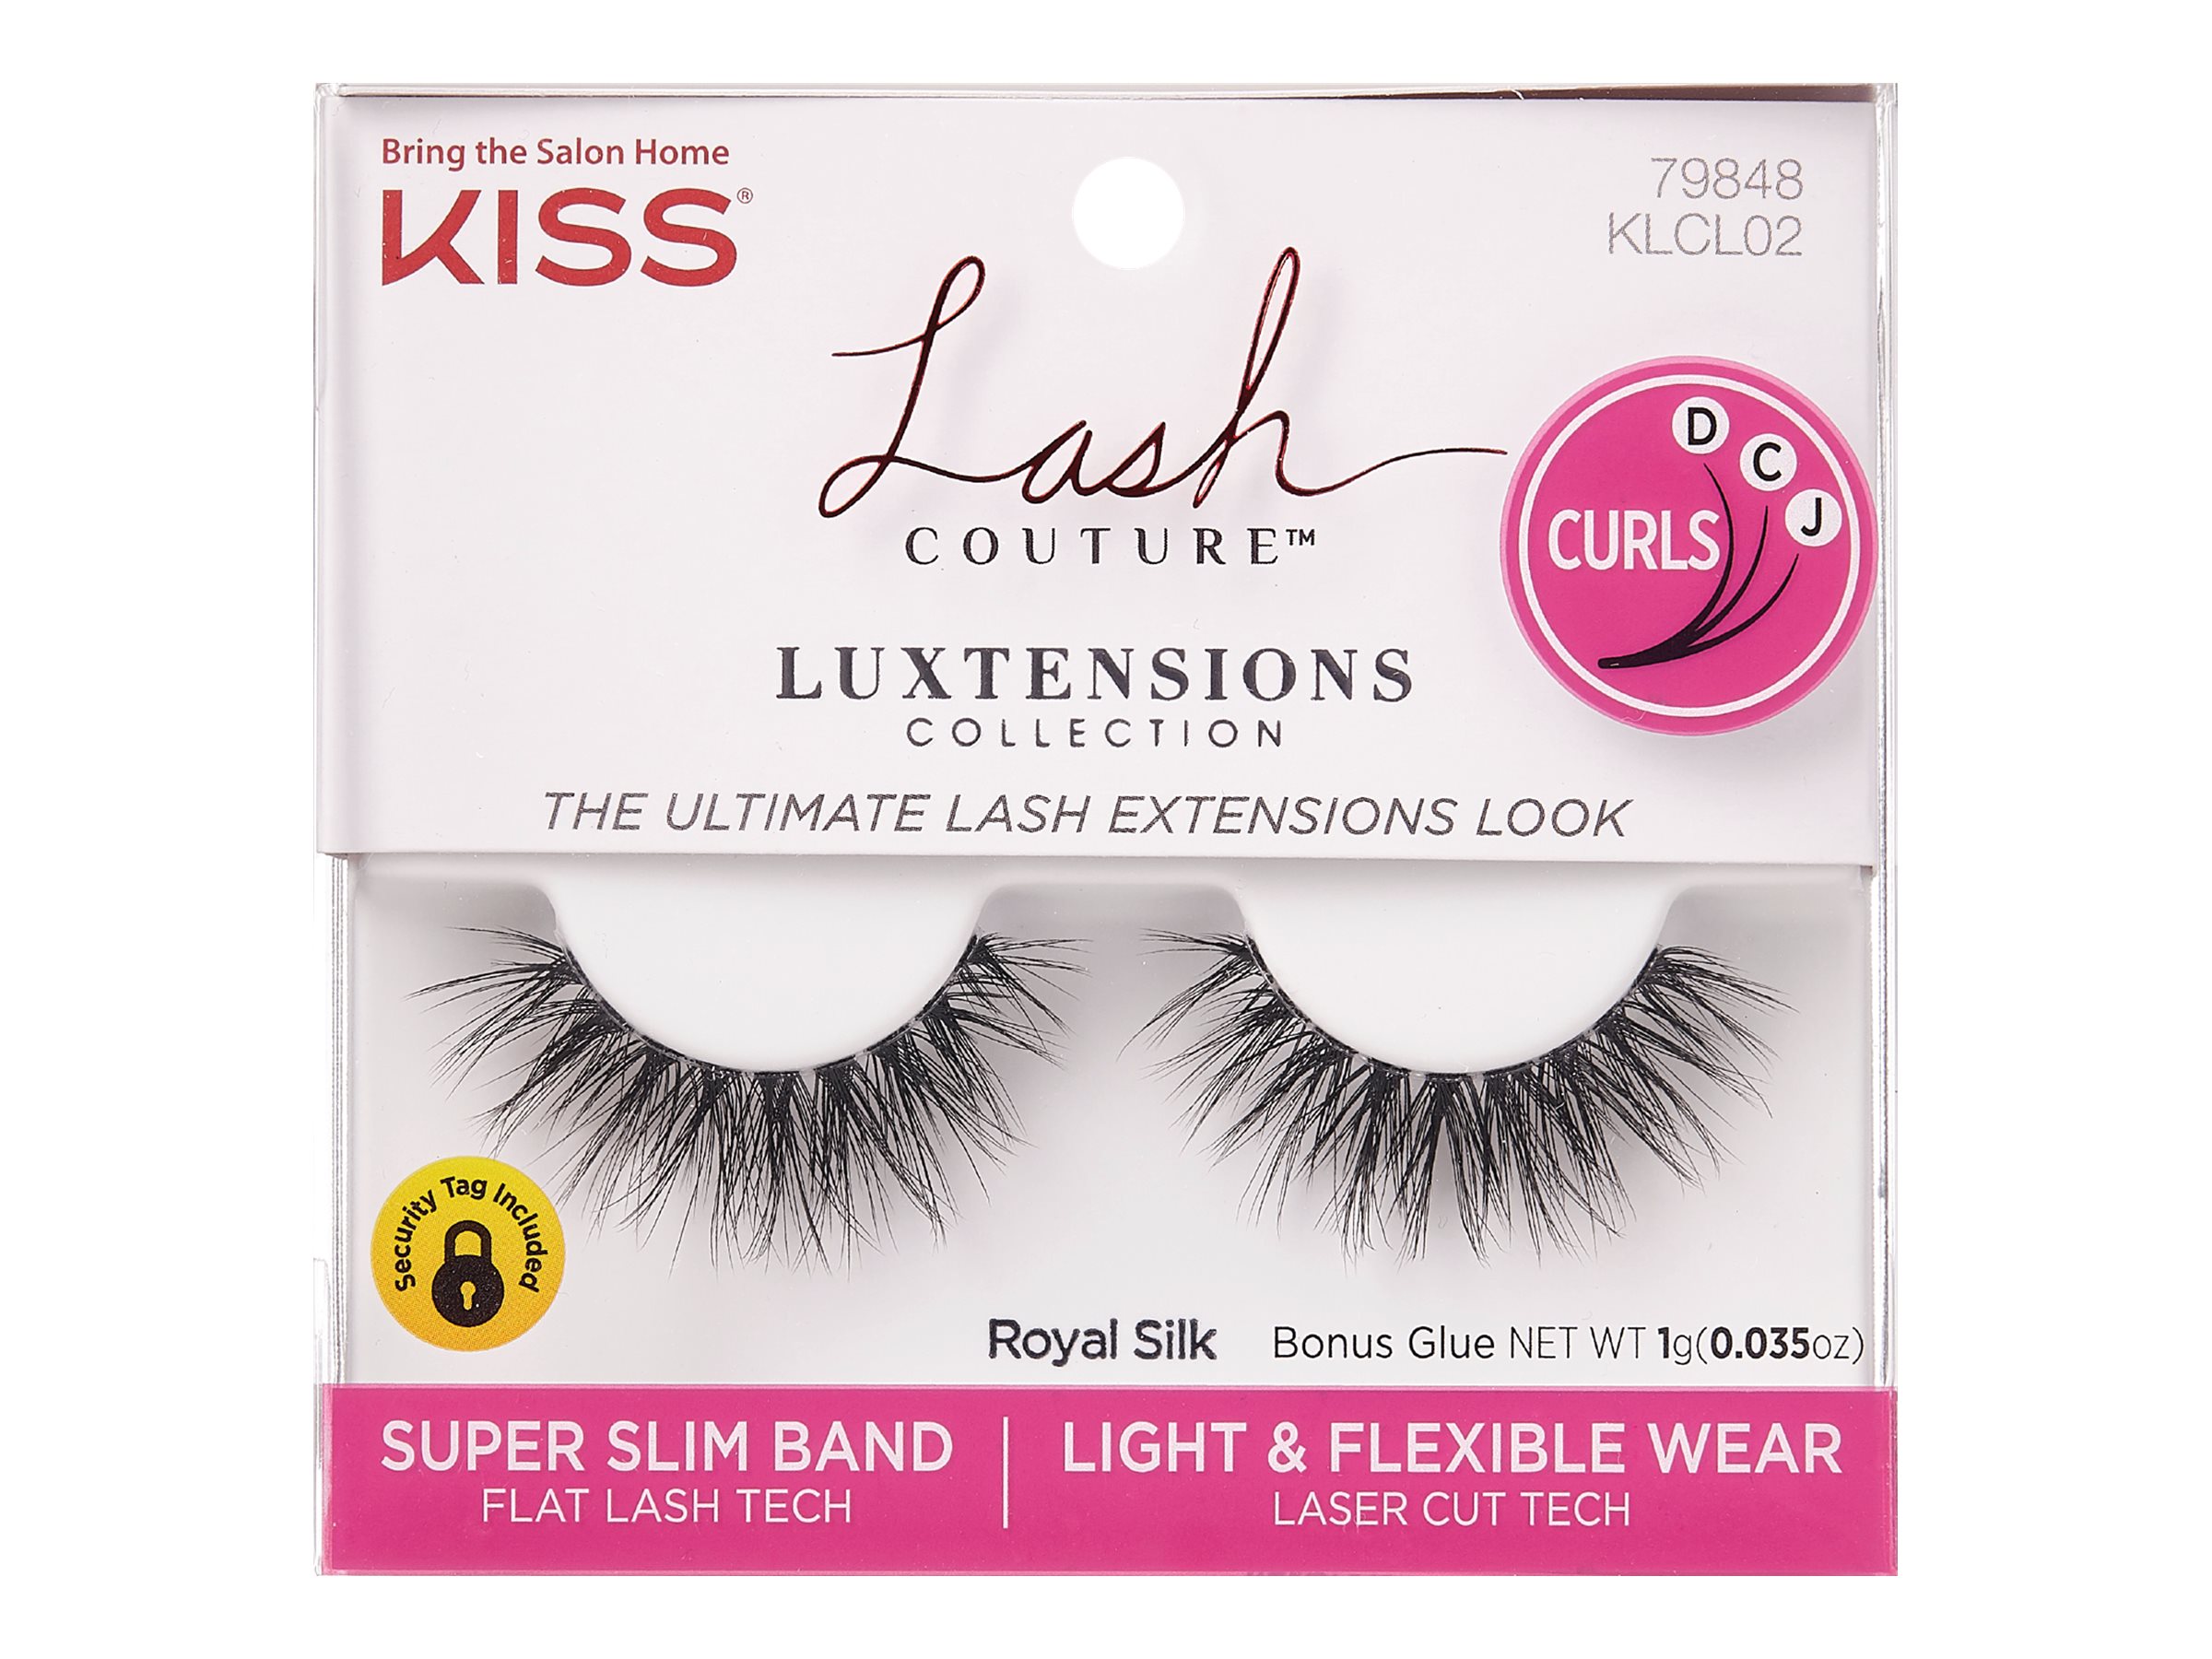 KISS Lash Couture LuXtensions Collection Royal Silk False Eyelashes - 1 pair